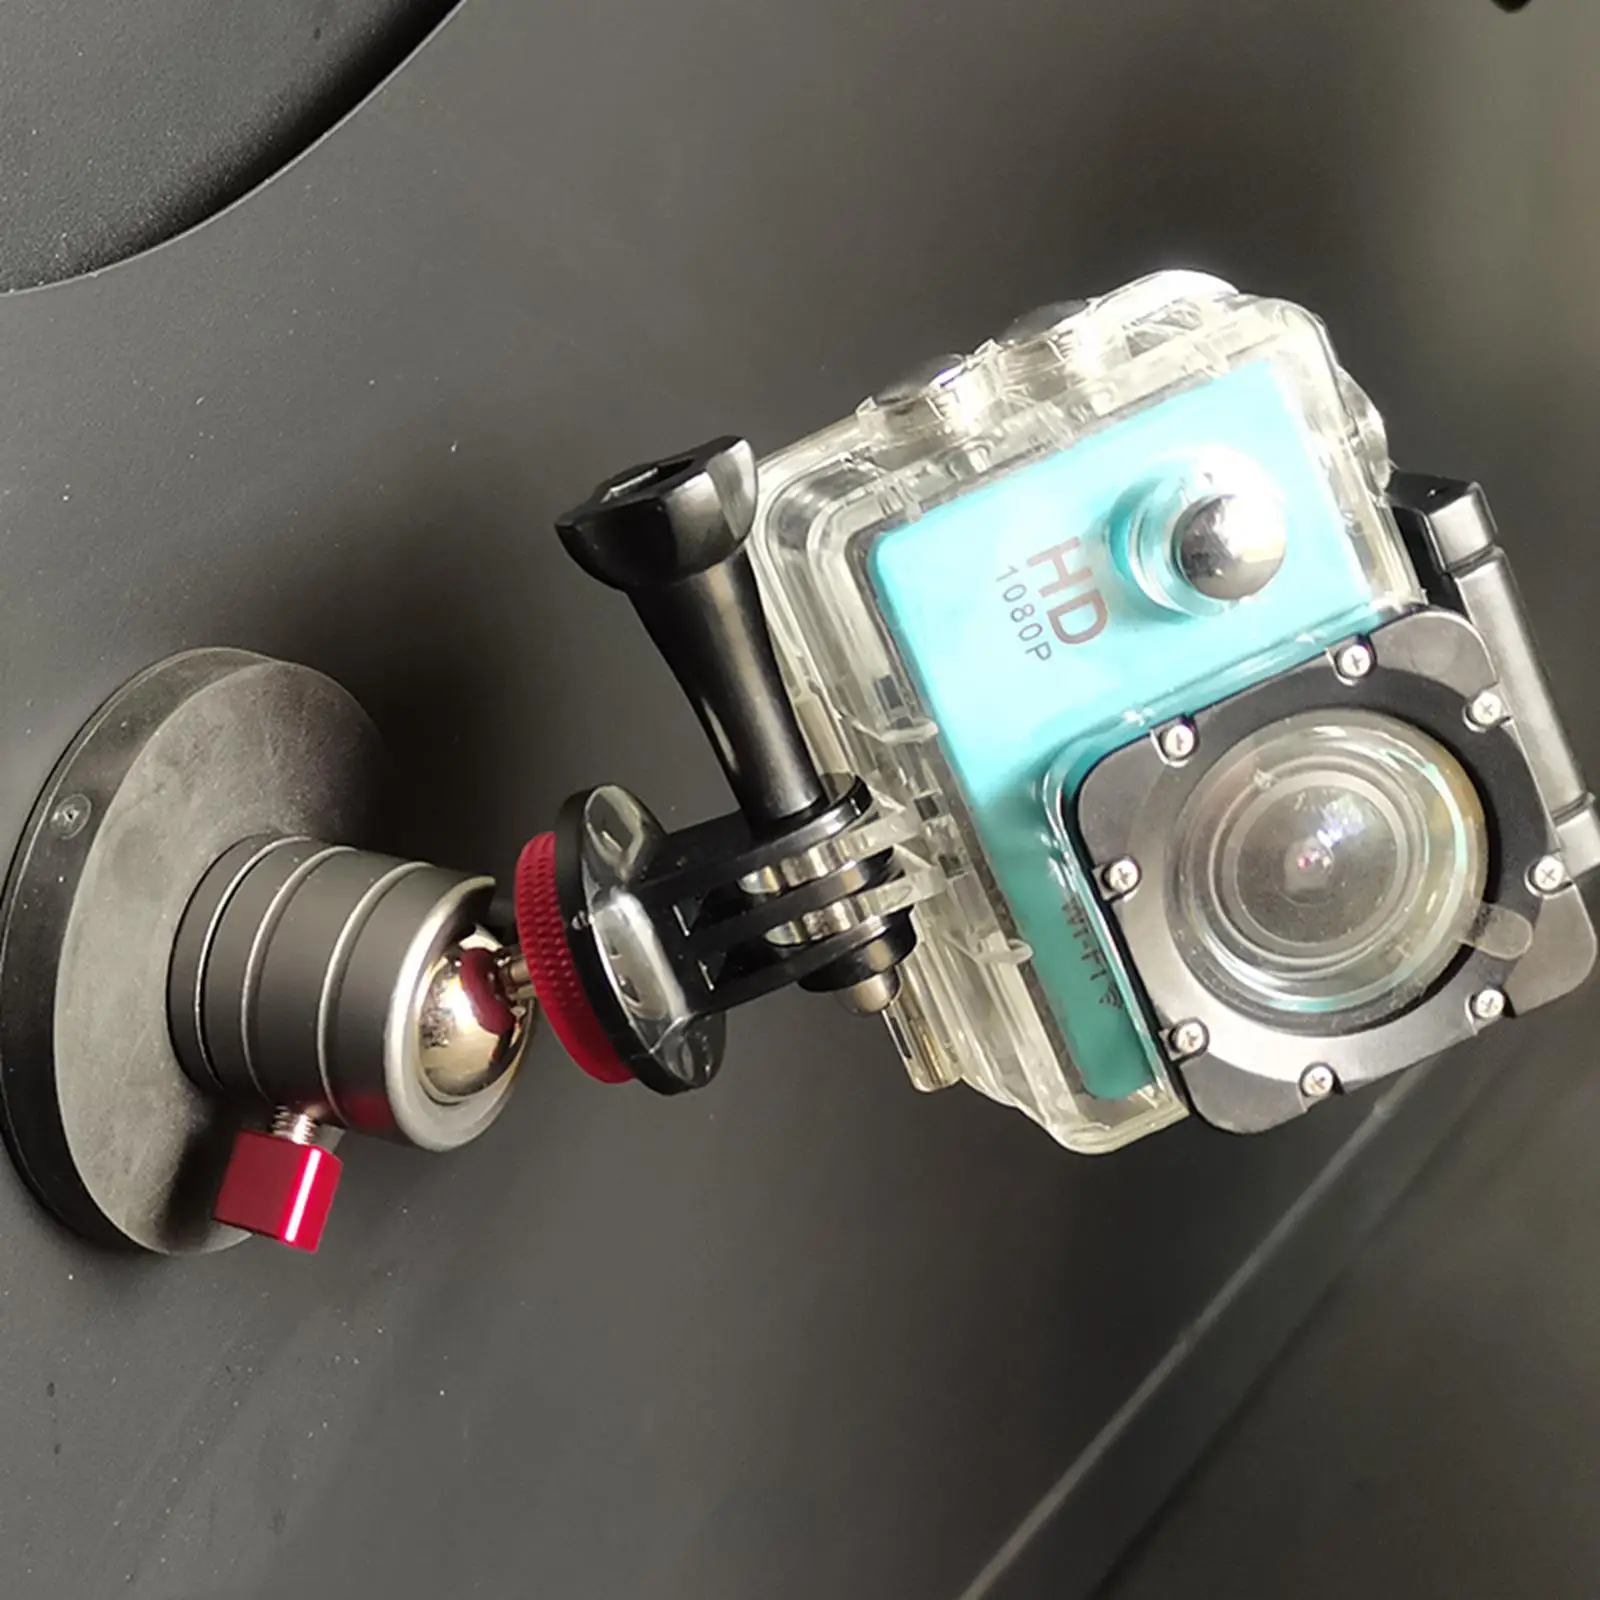 Magnetic Camera Mount with 1/4